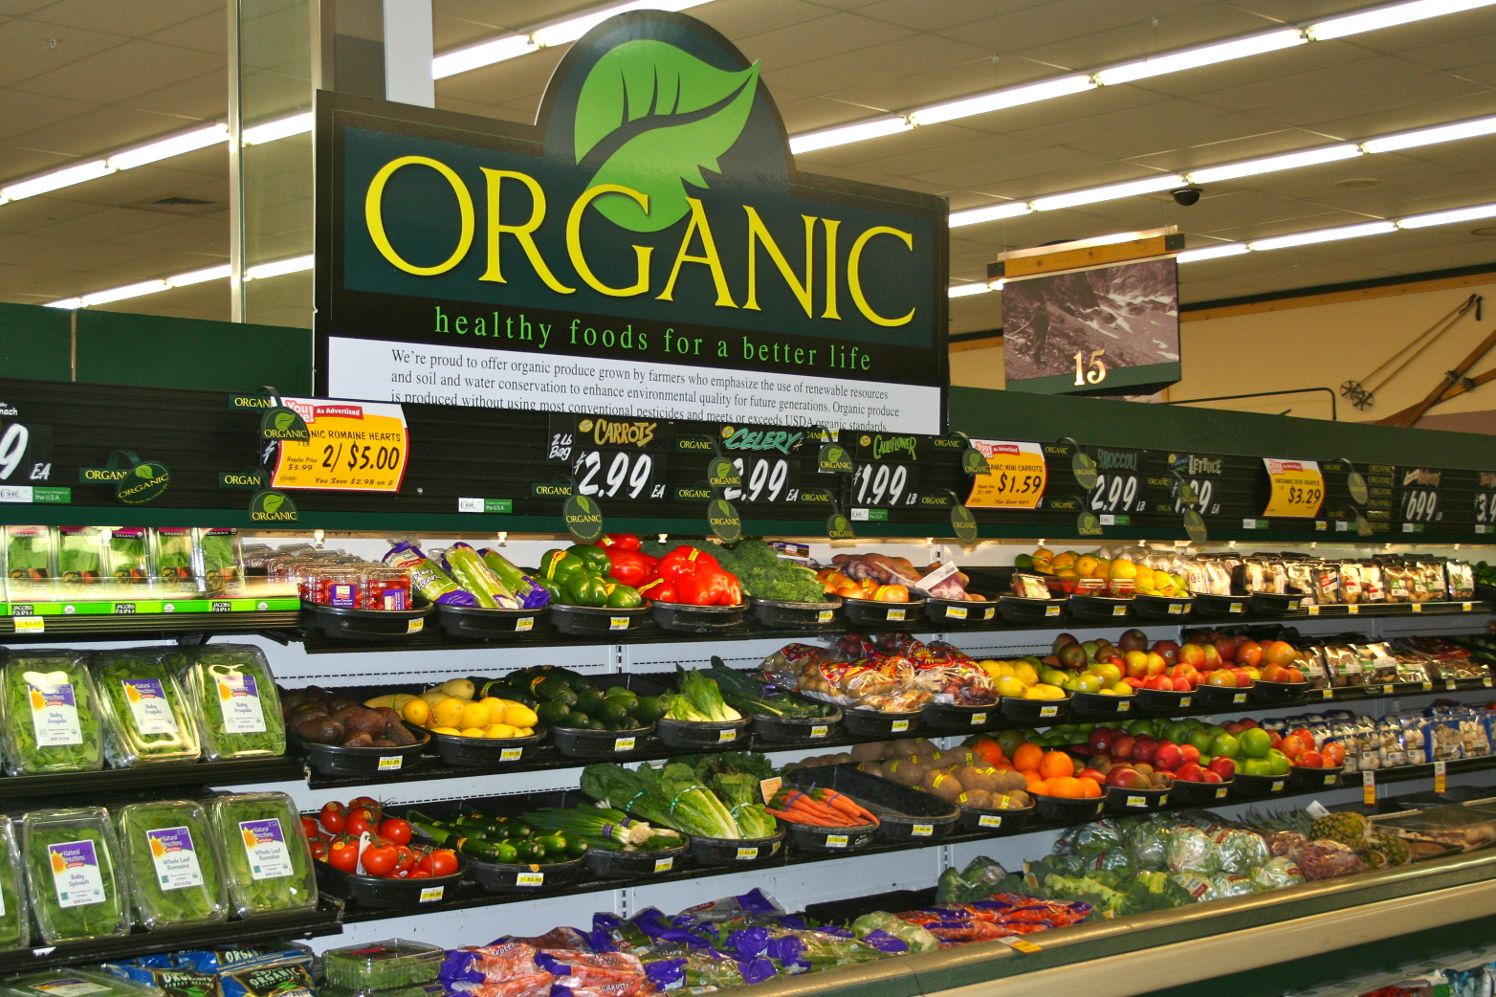 There is presently no scientific research that provides strong evidence that organic food products are healthier than nonorganic. (Photo: The Market at Park City)